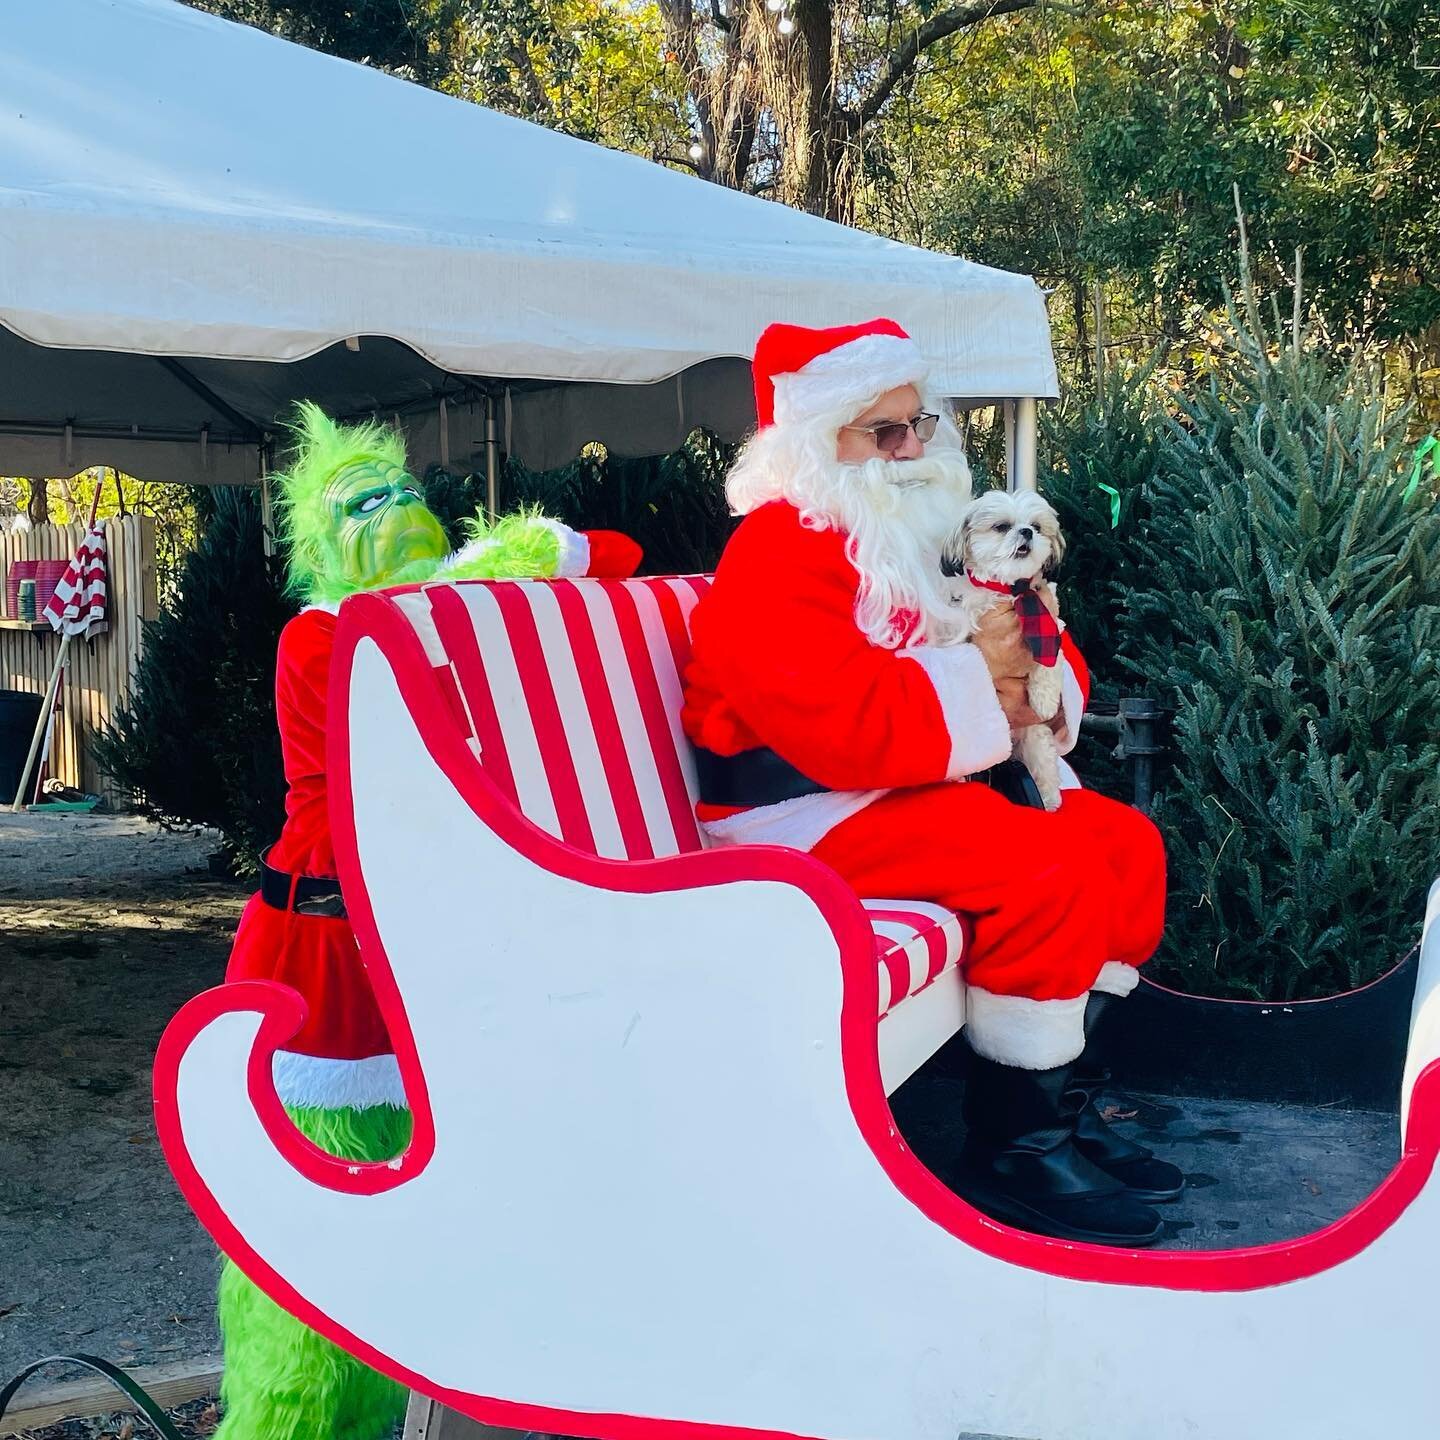 Come out on this beautiful December day, select your Christmas tree and join in the fun with All 4 Paws Animal Rescue &lsquo;til 3pm! 
.
Cabana Christmas Trees and Holiday Market, open daily 9am - 7pm!

🎄🎅🏽🐾🎄